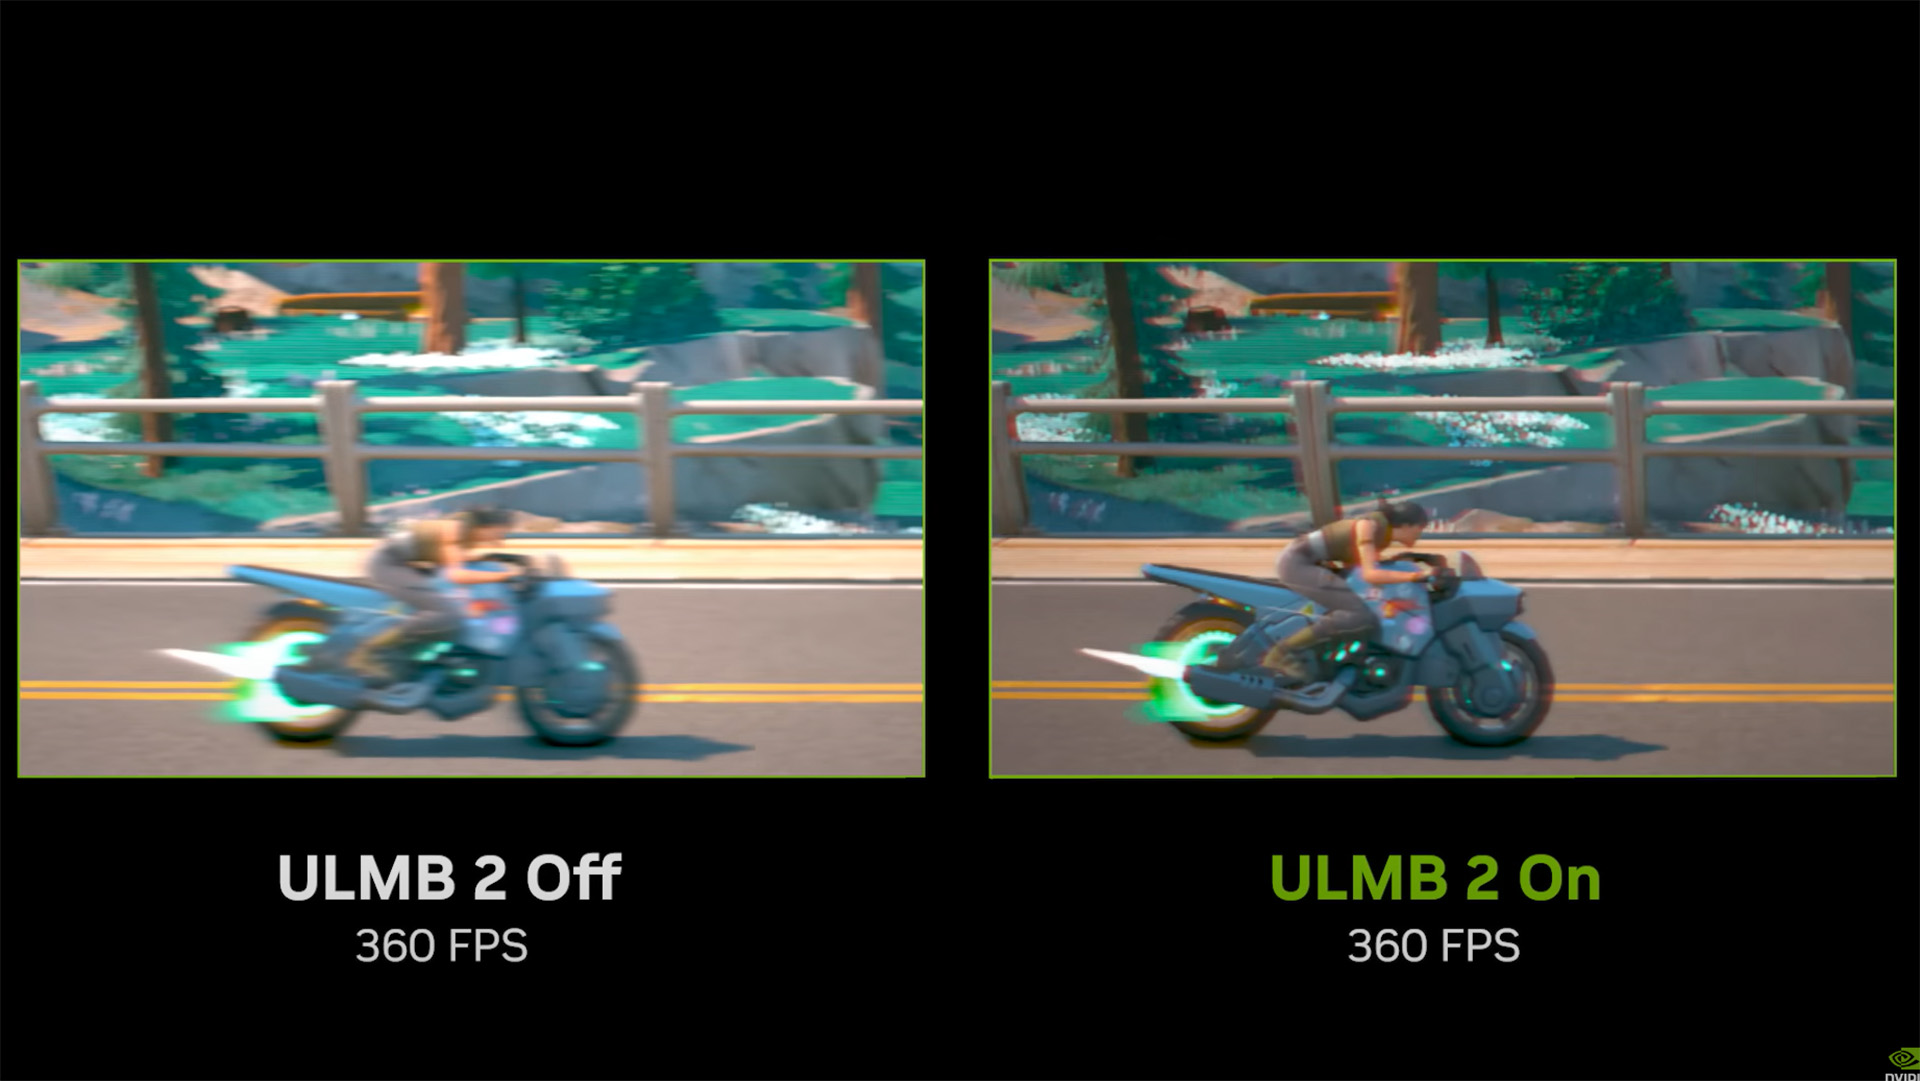 NVIDIA's G-Sync ULMB 2 aims to minimize motion blur in games